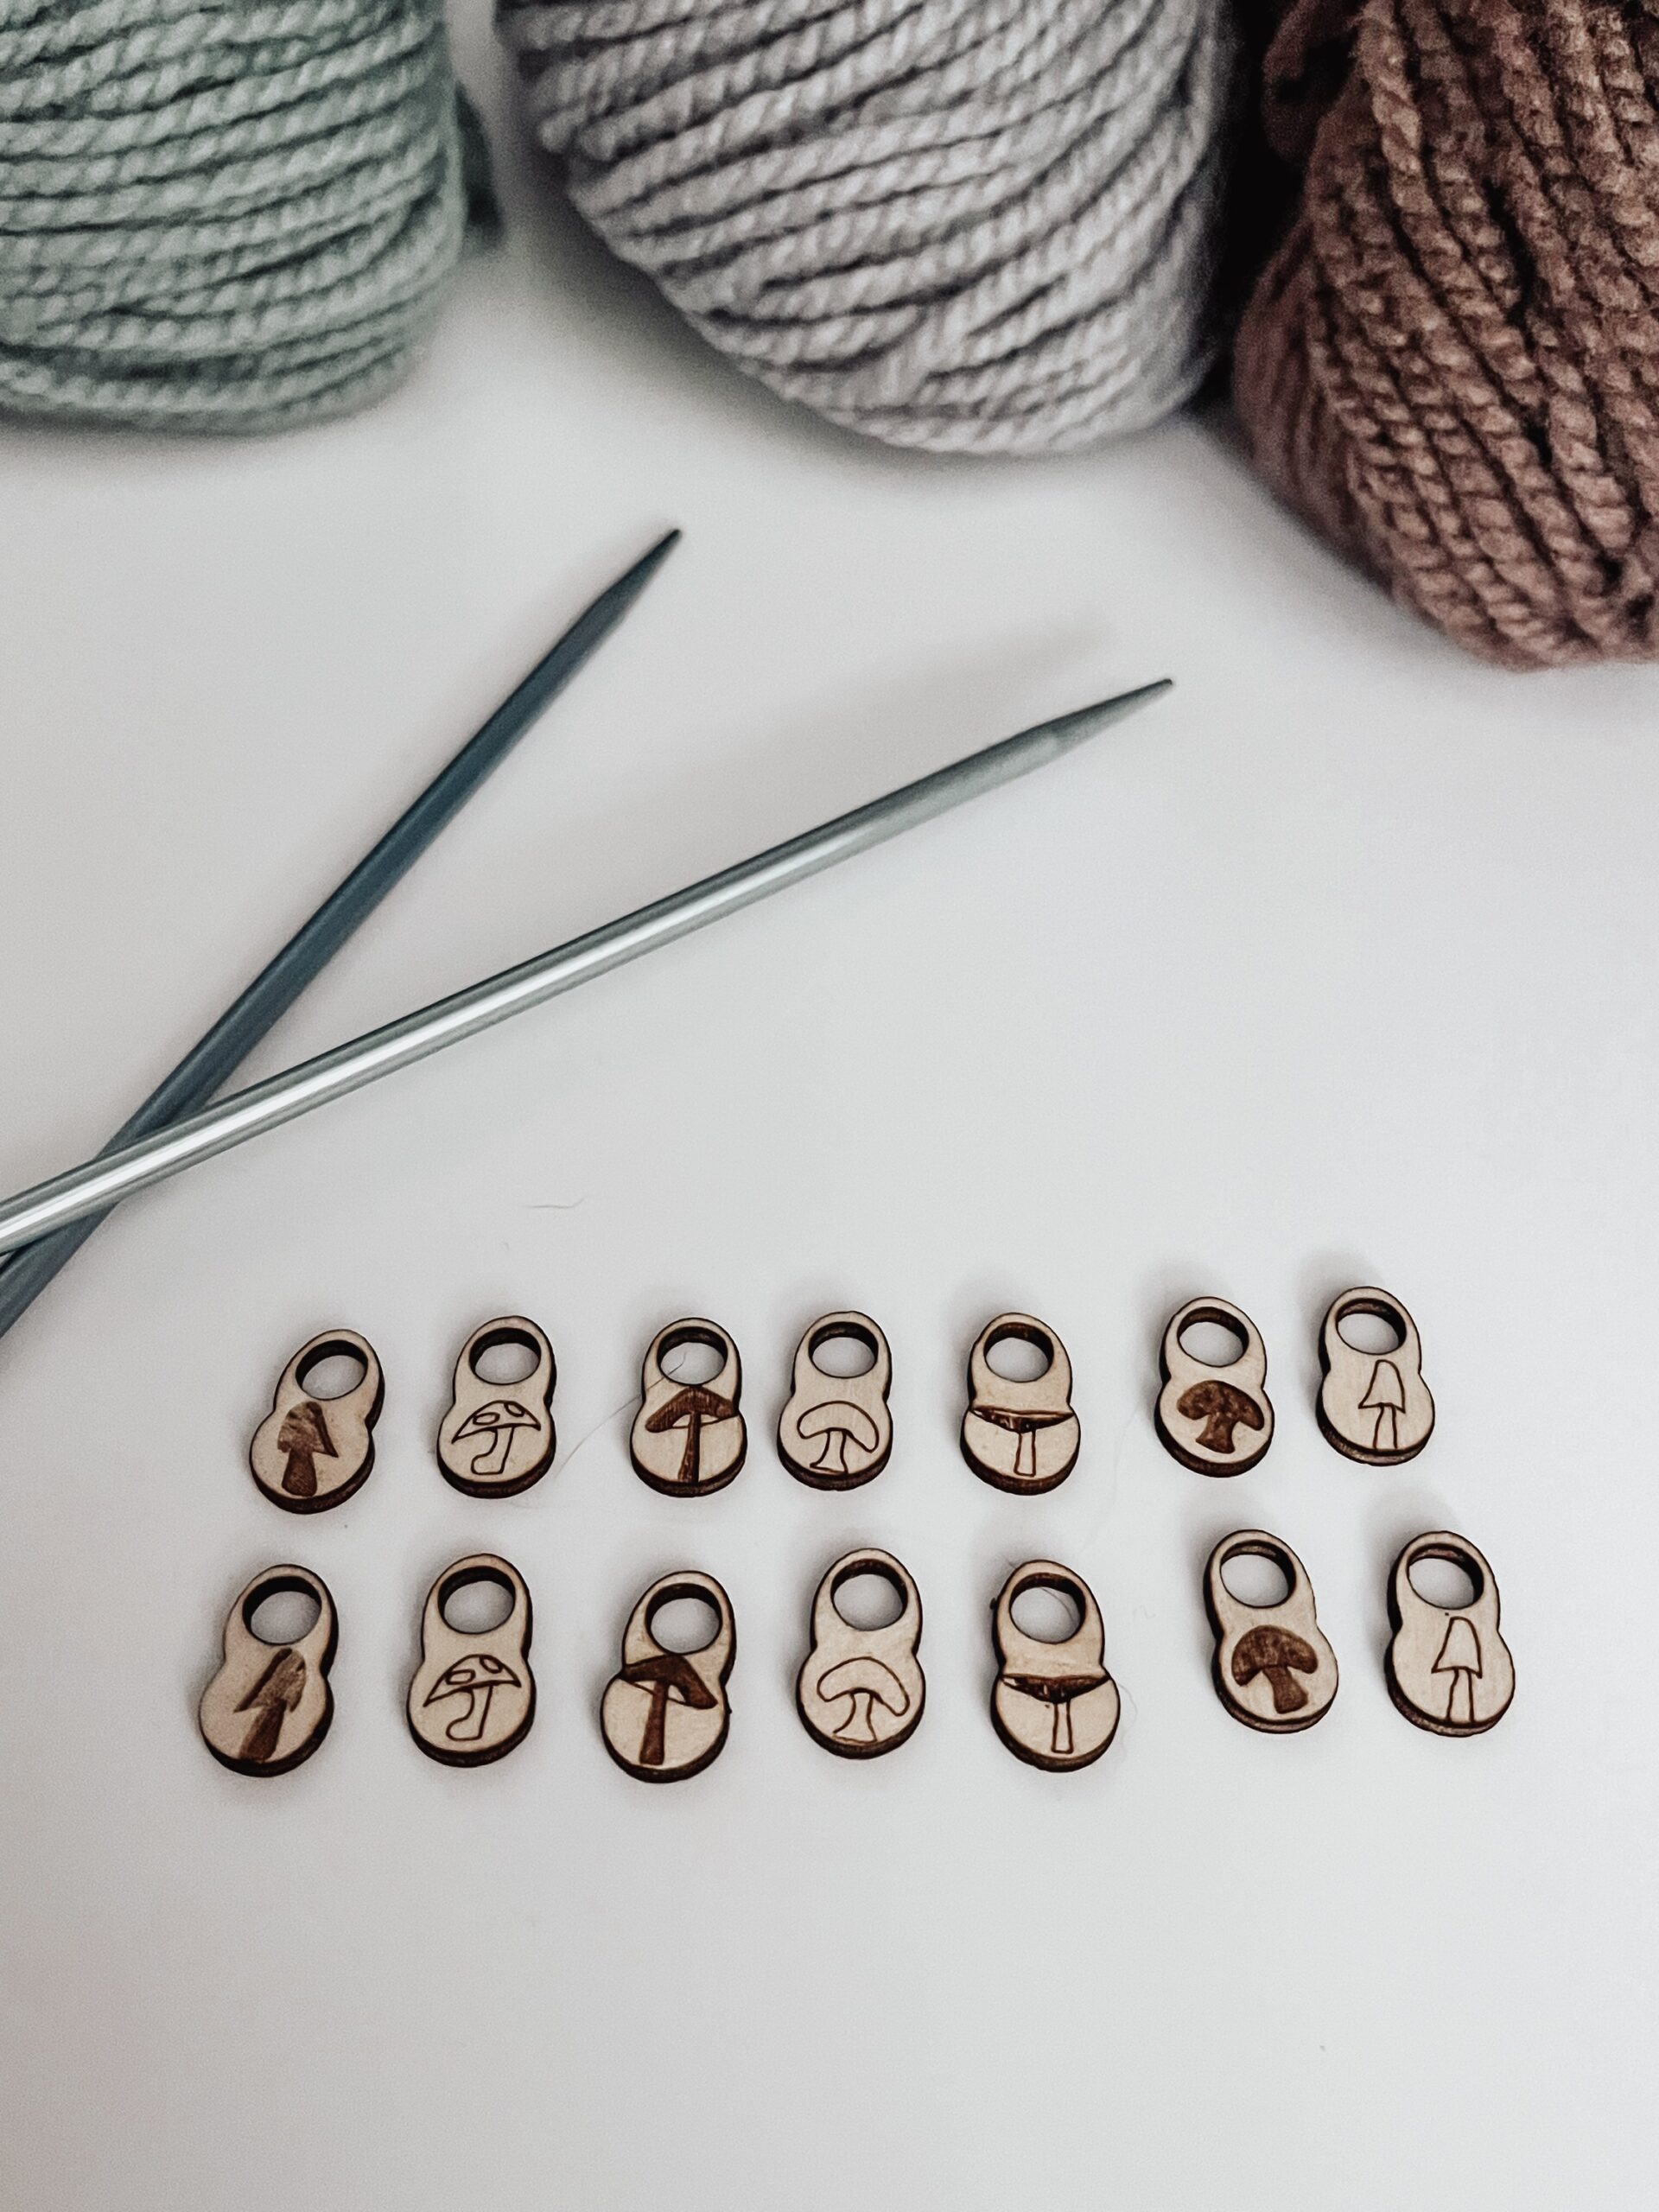 A total of 14 wood stitch markers with a variety of hand-drawn mushroom designs are displayed with a pair of metal knitting needles and three skeins of merino yarn are in the background.